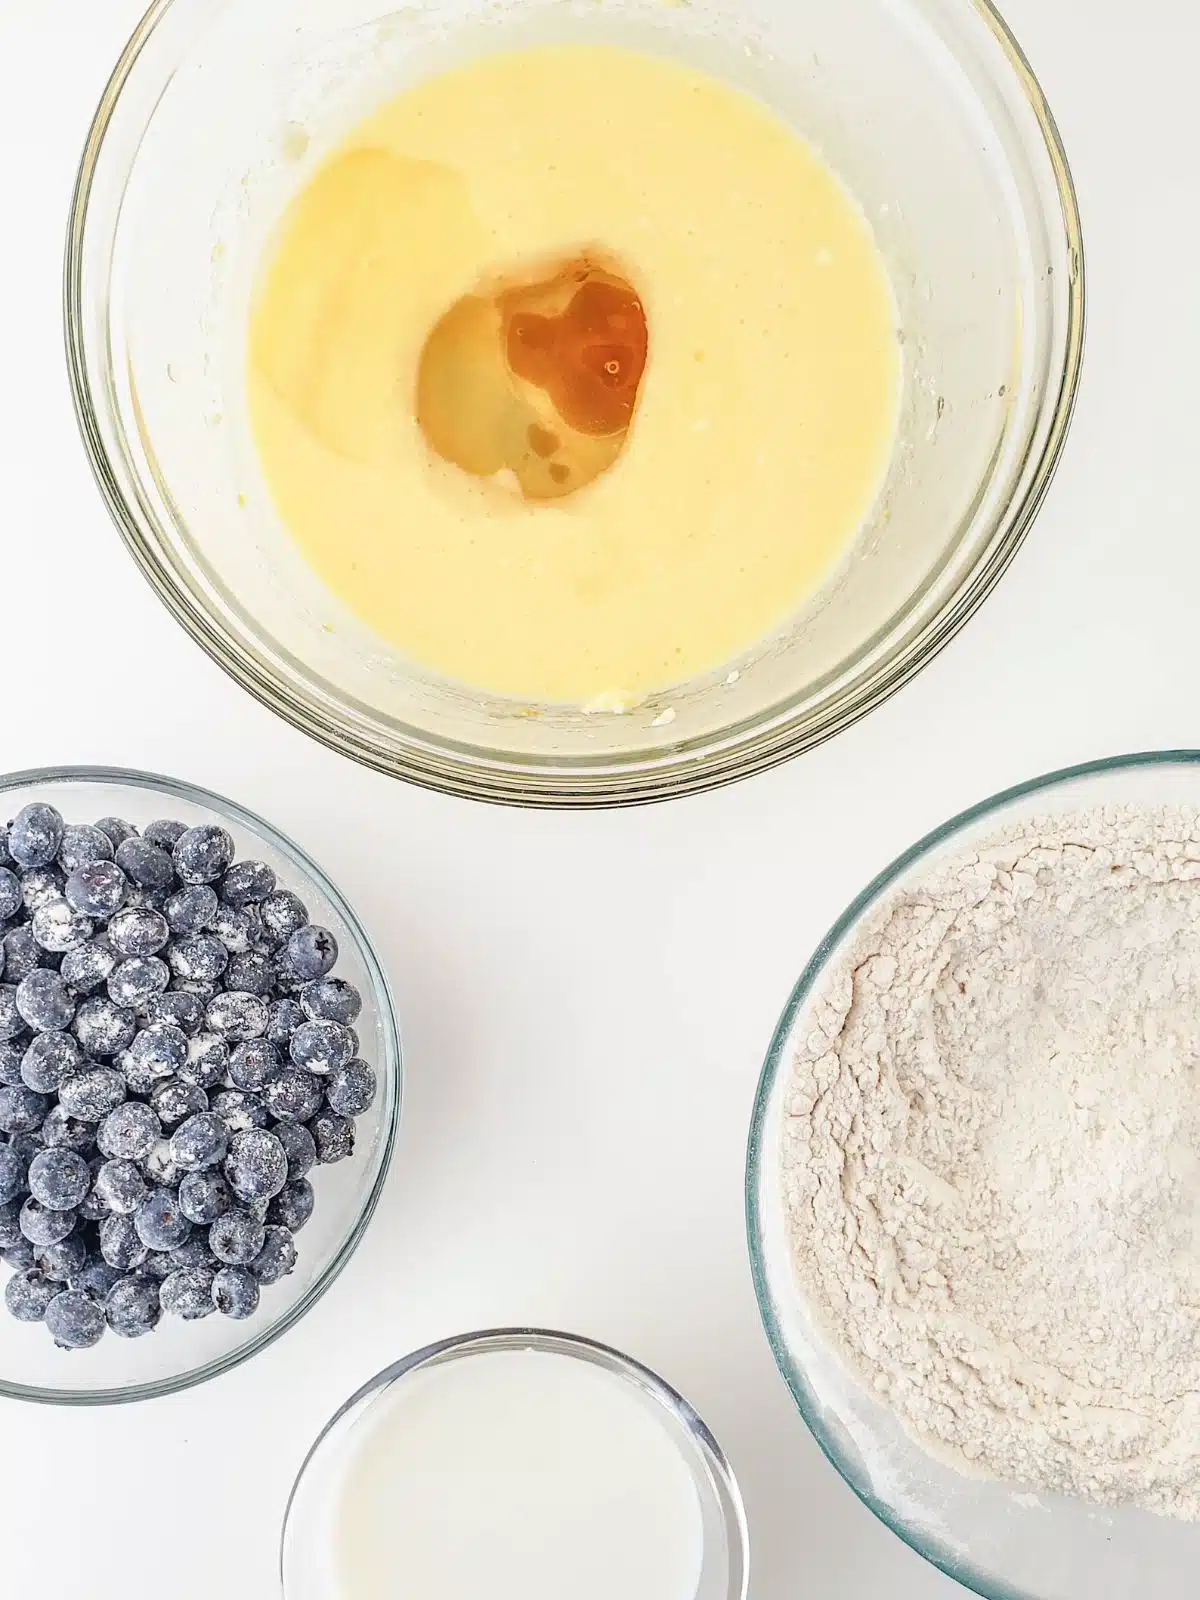 combine ingredients together for blueberry muffins.